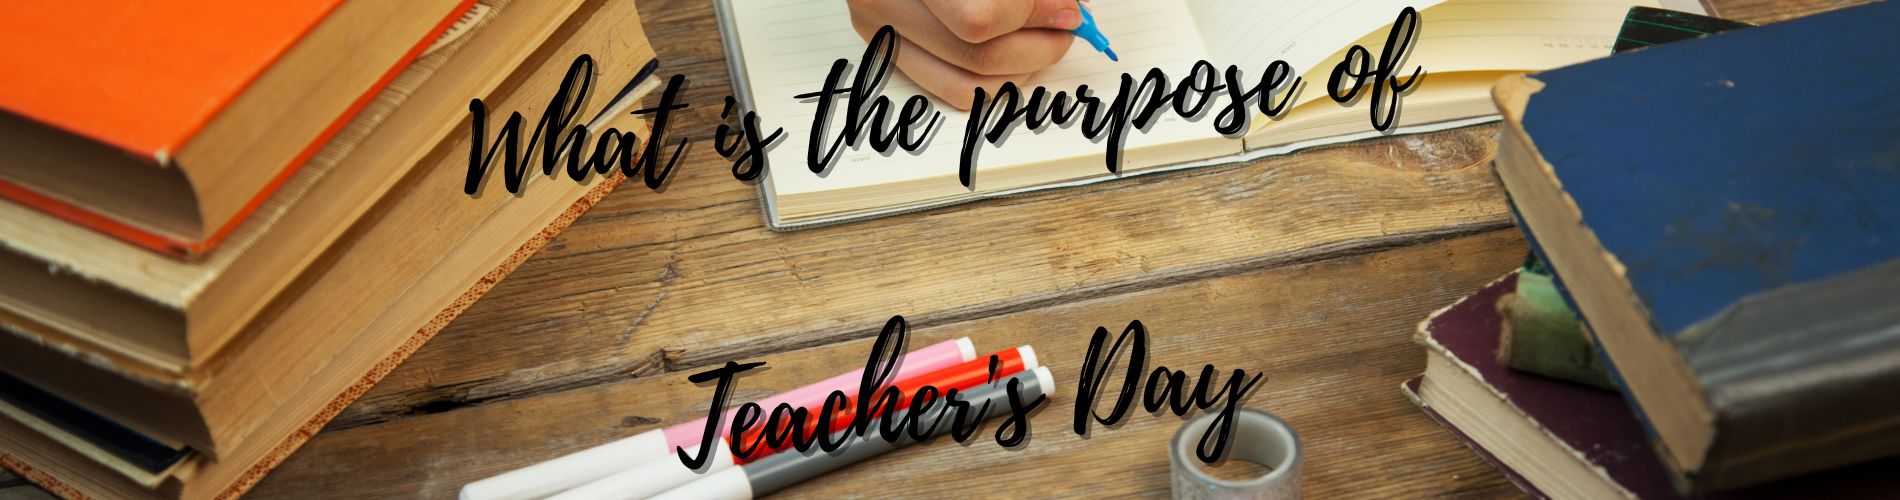 What Is the Purpose of Teacher's Day?